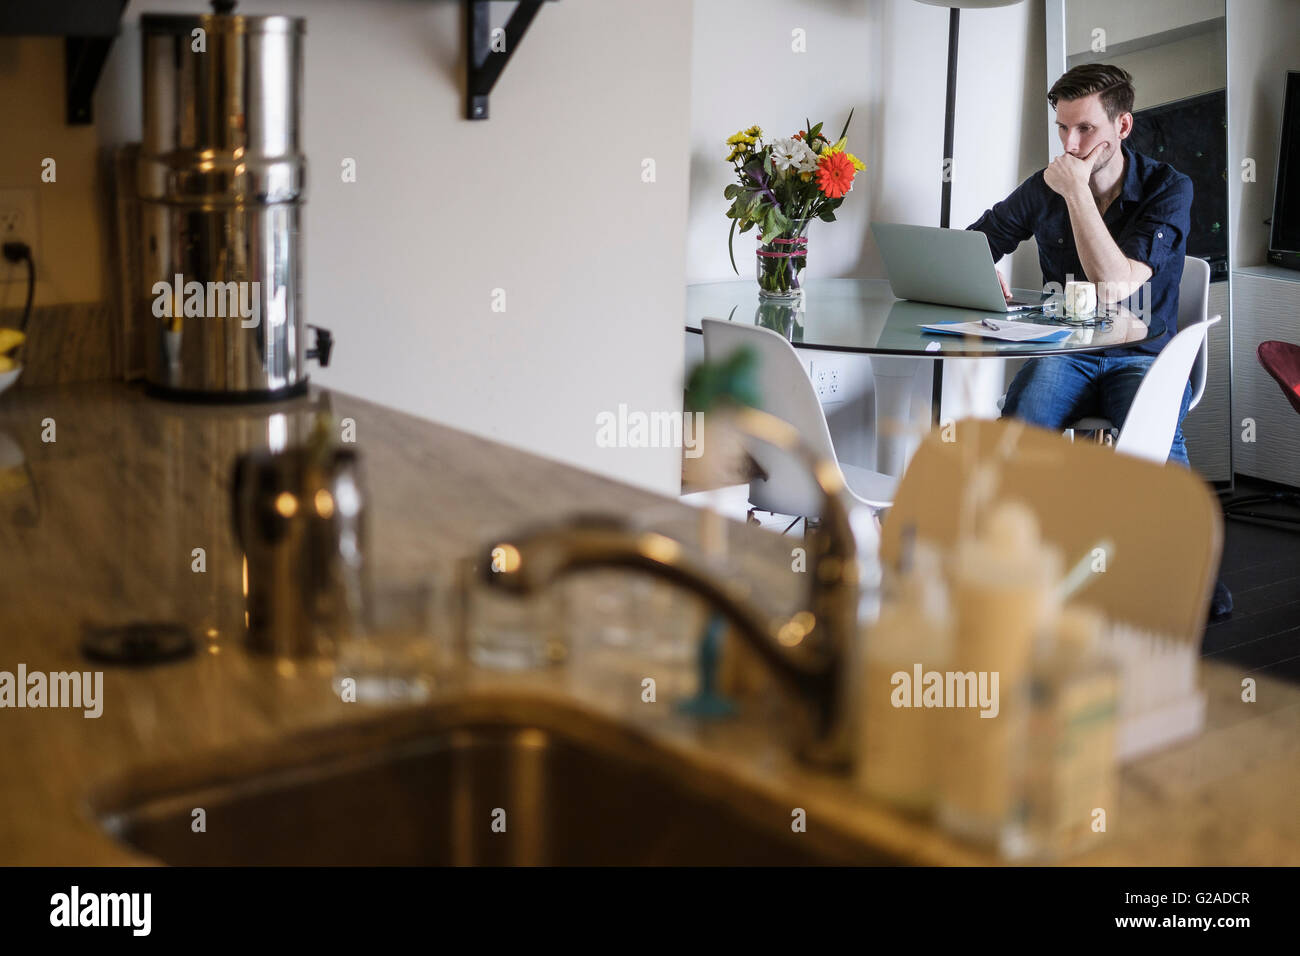 Man working on laptop at home Stock Photo